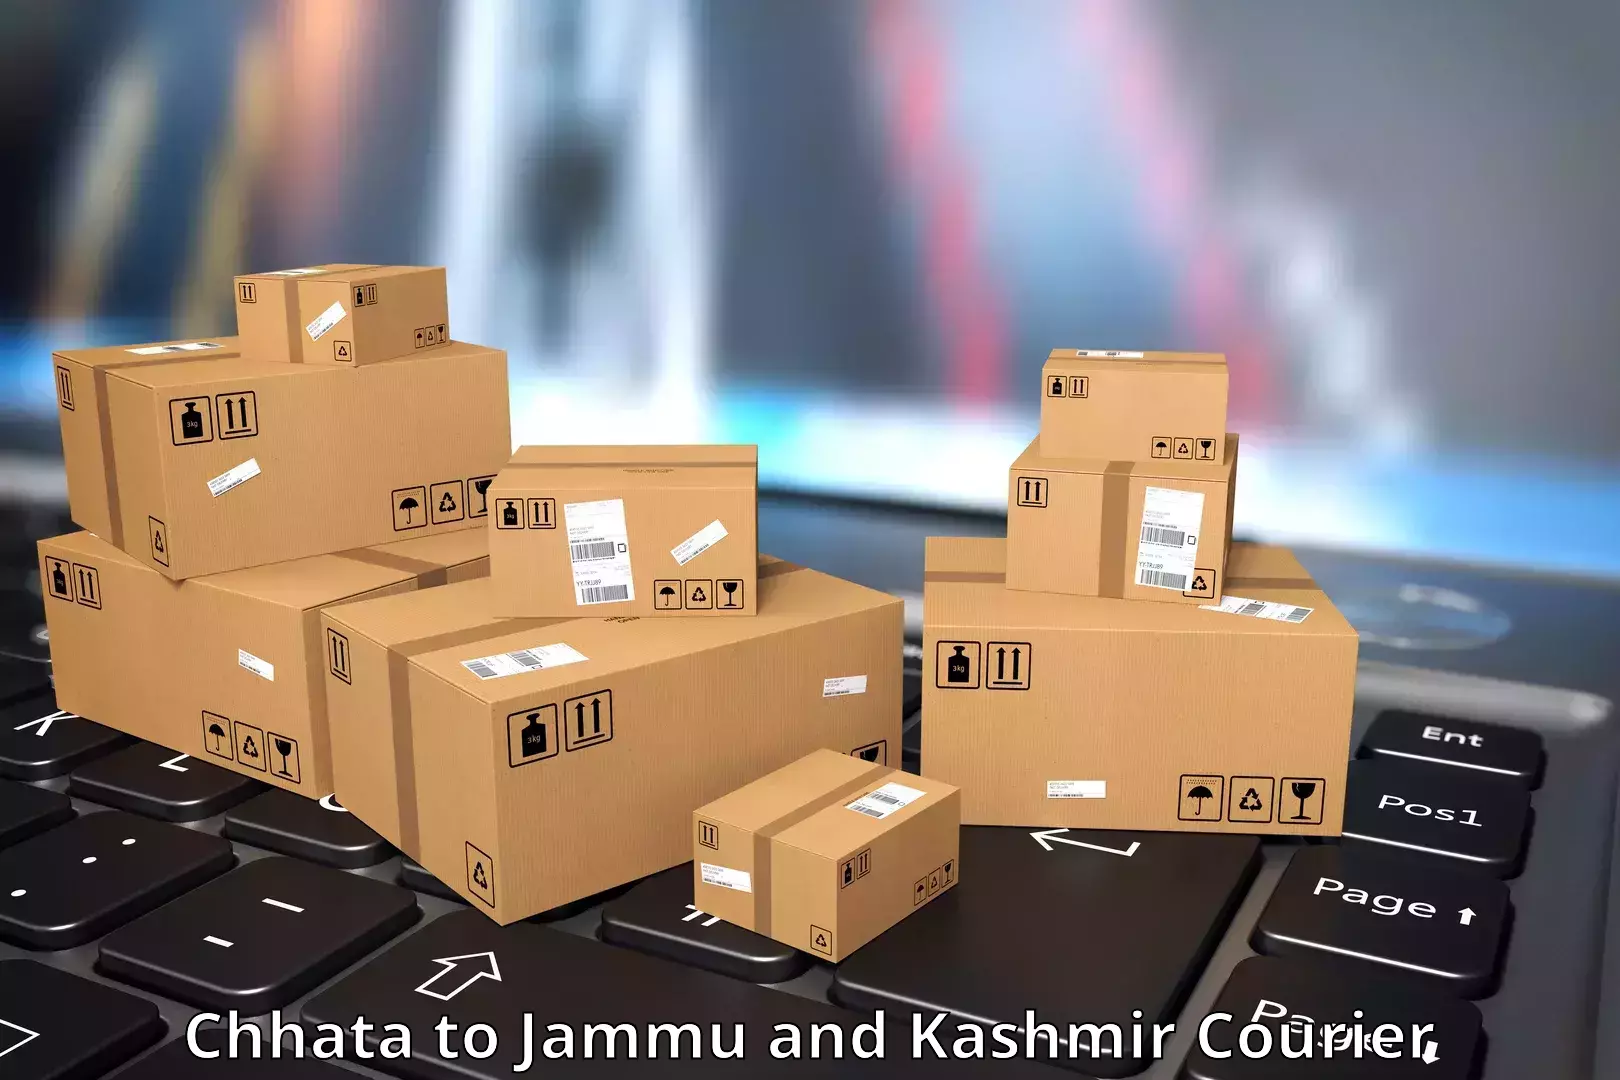 Global shipping networks Chhata to Jakh